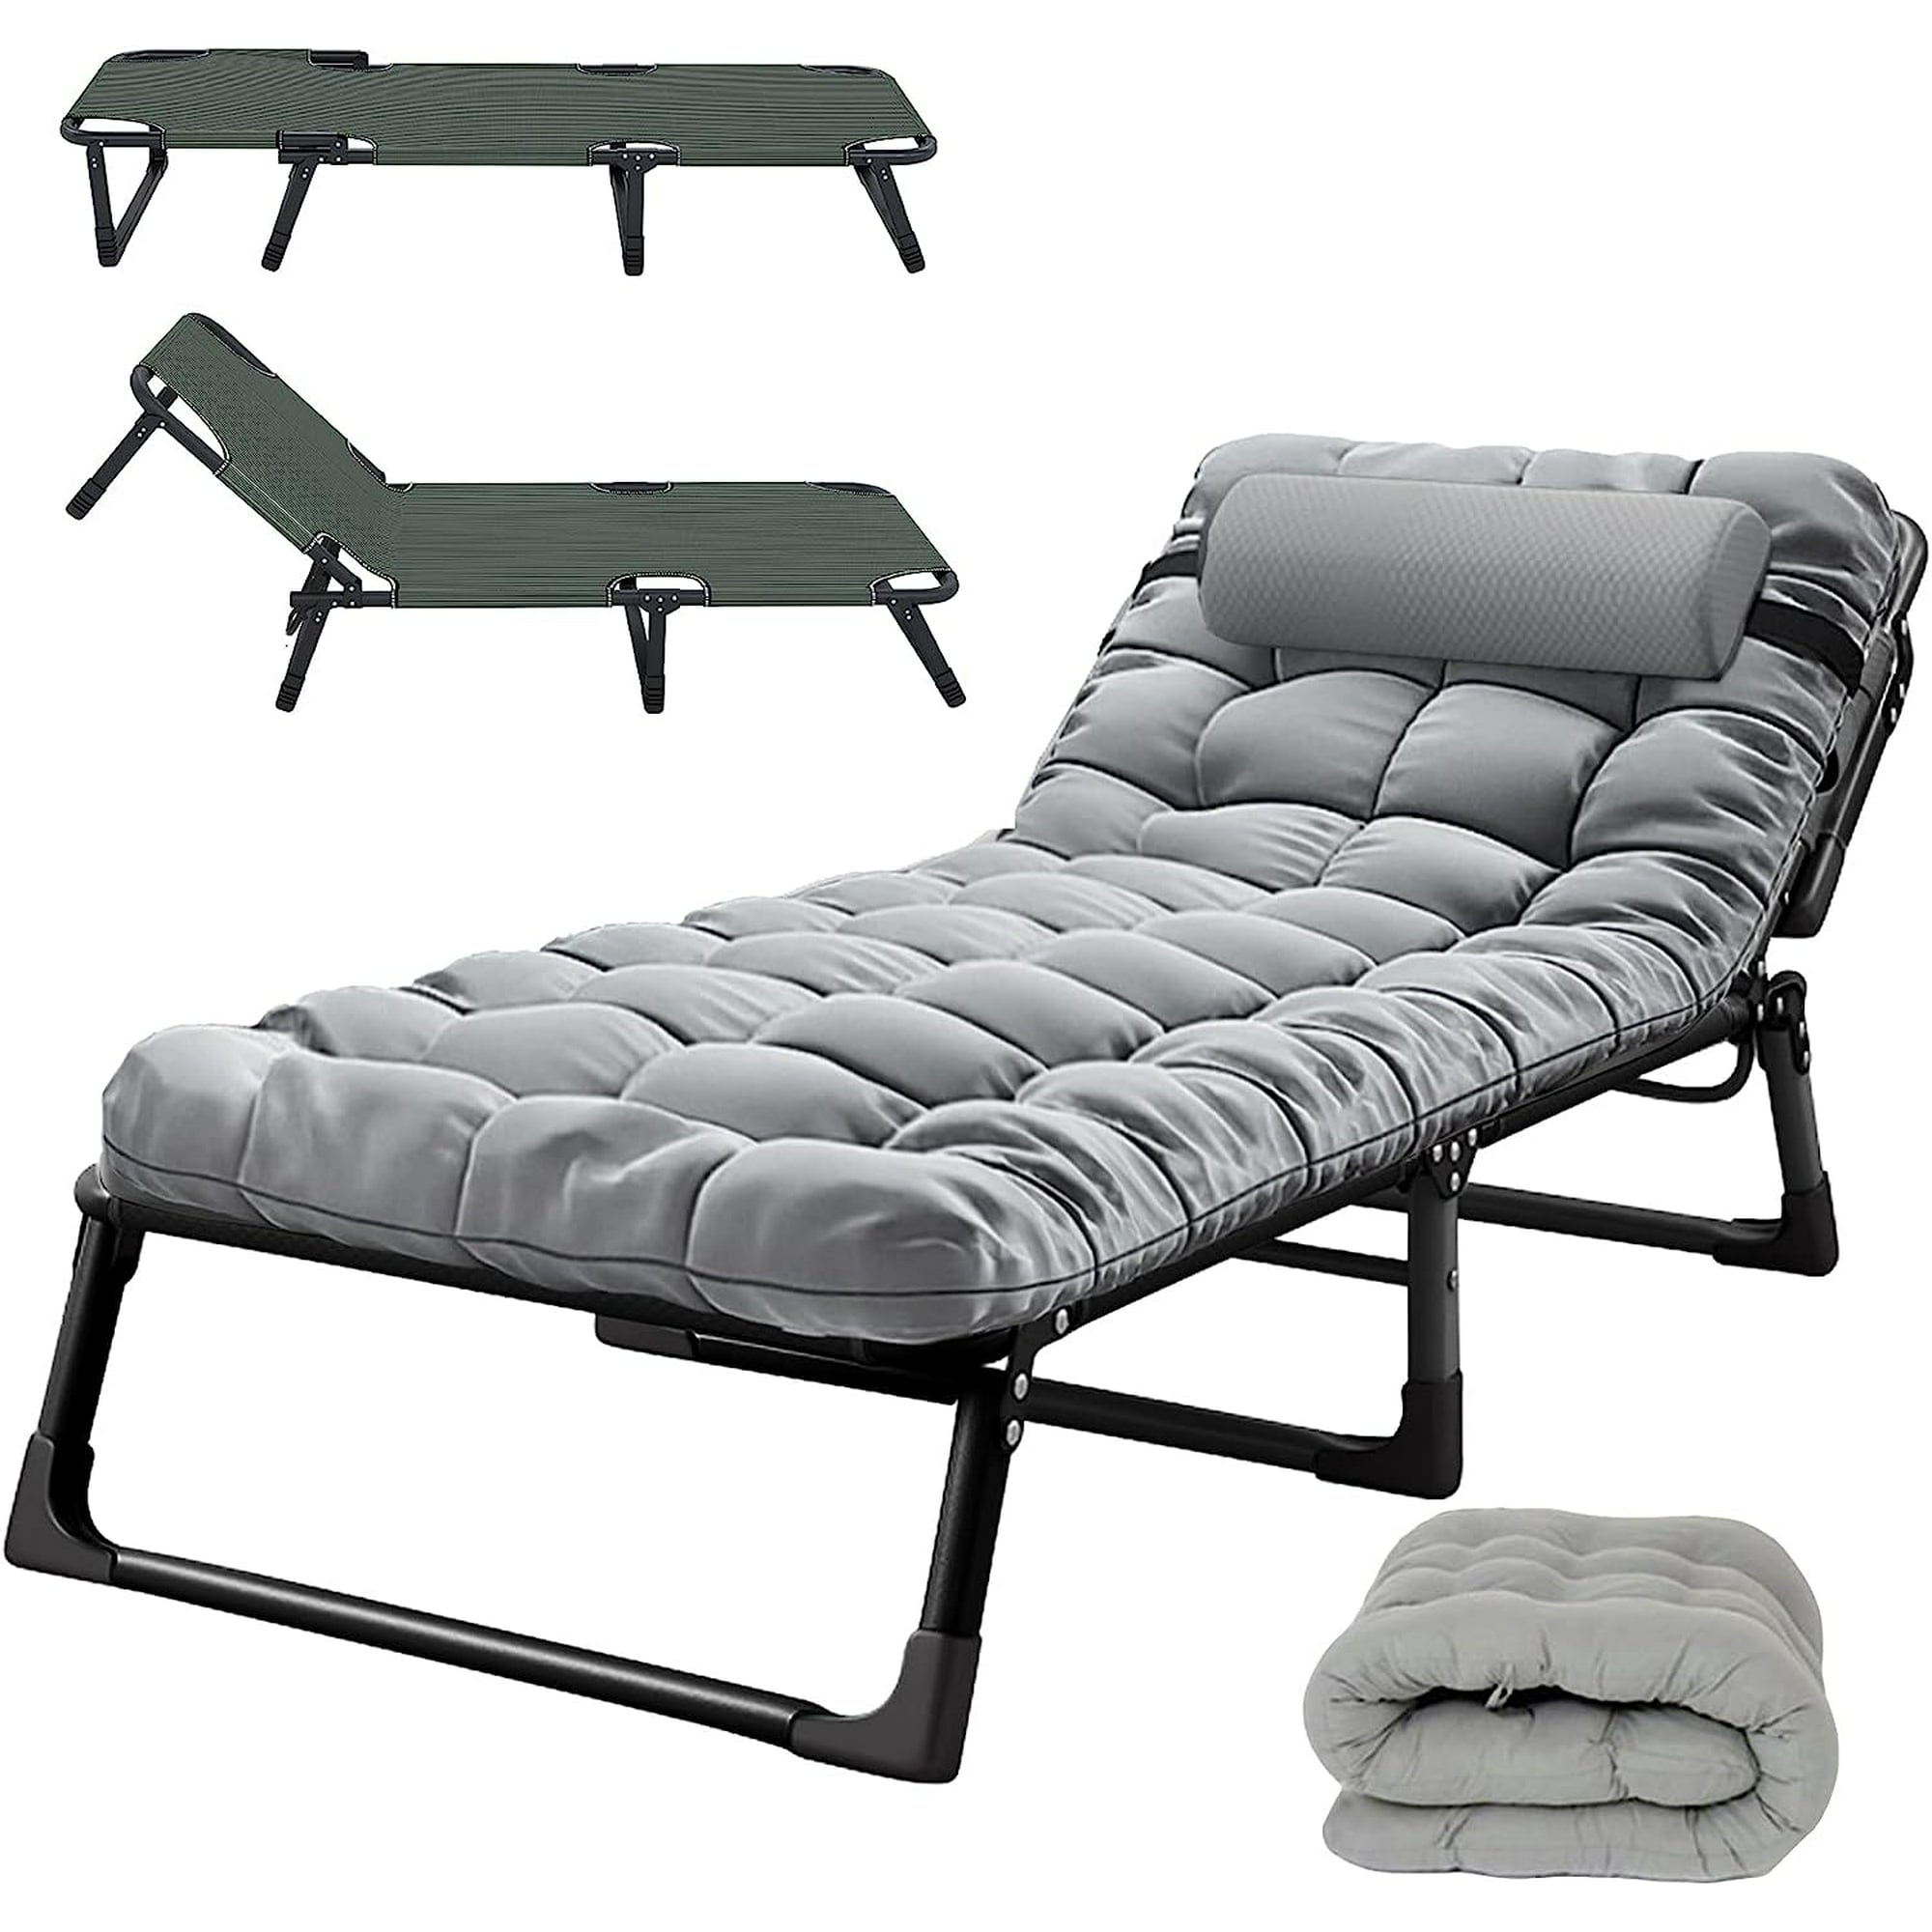 SUGIFT Folding Camping Cot, Adjustable 4-Position Adults Reclining Chairs with Mattress